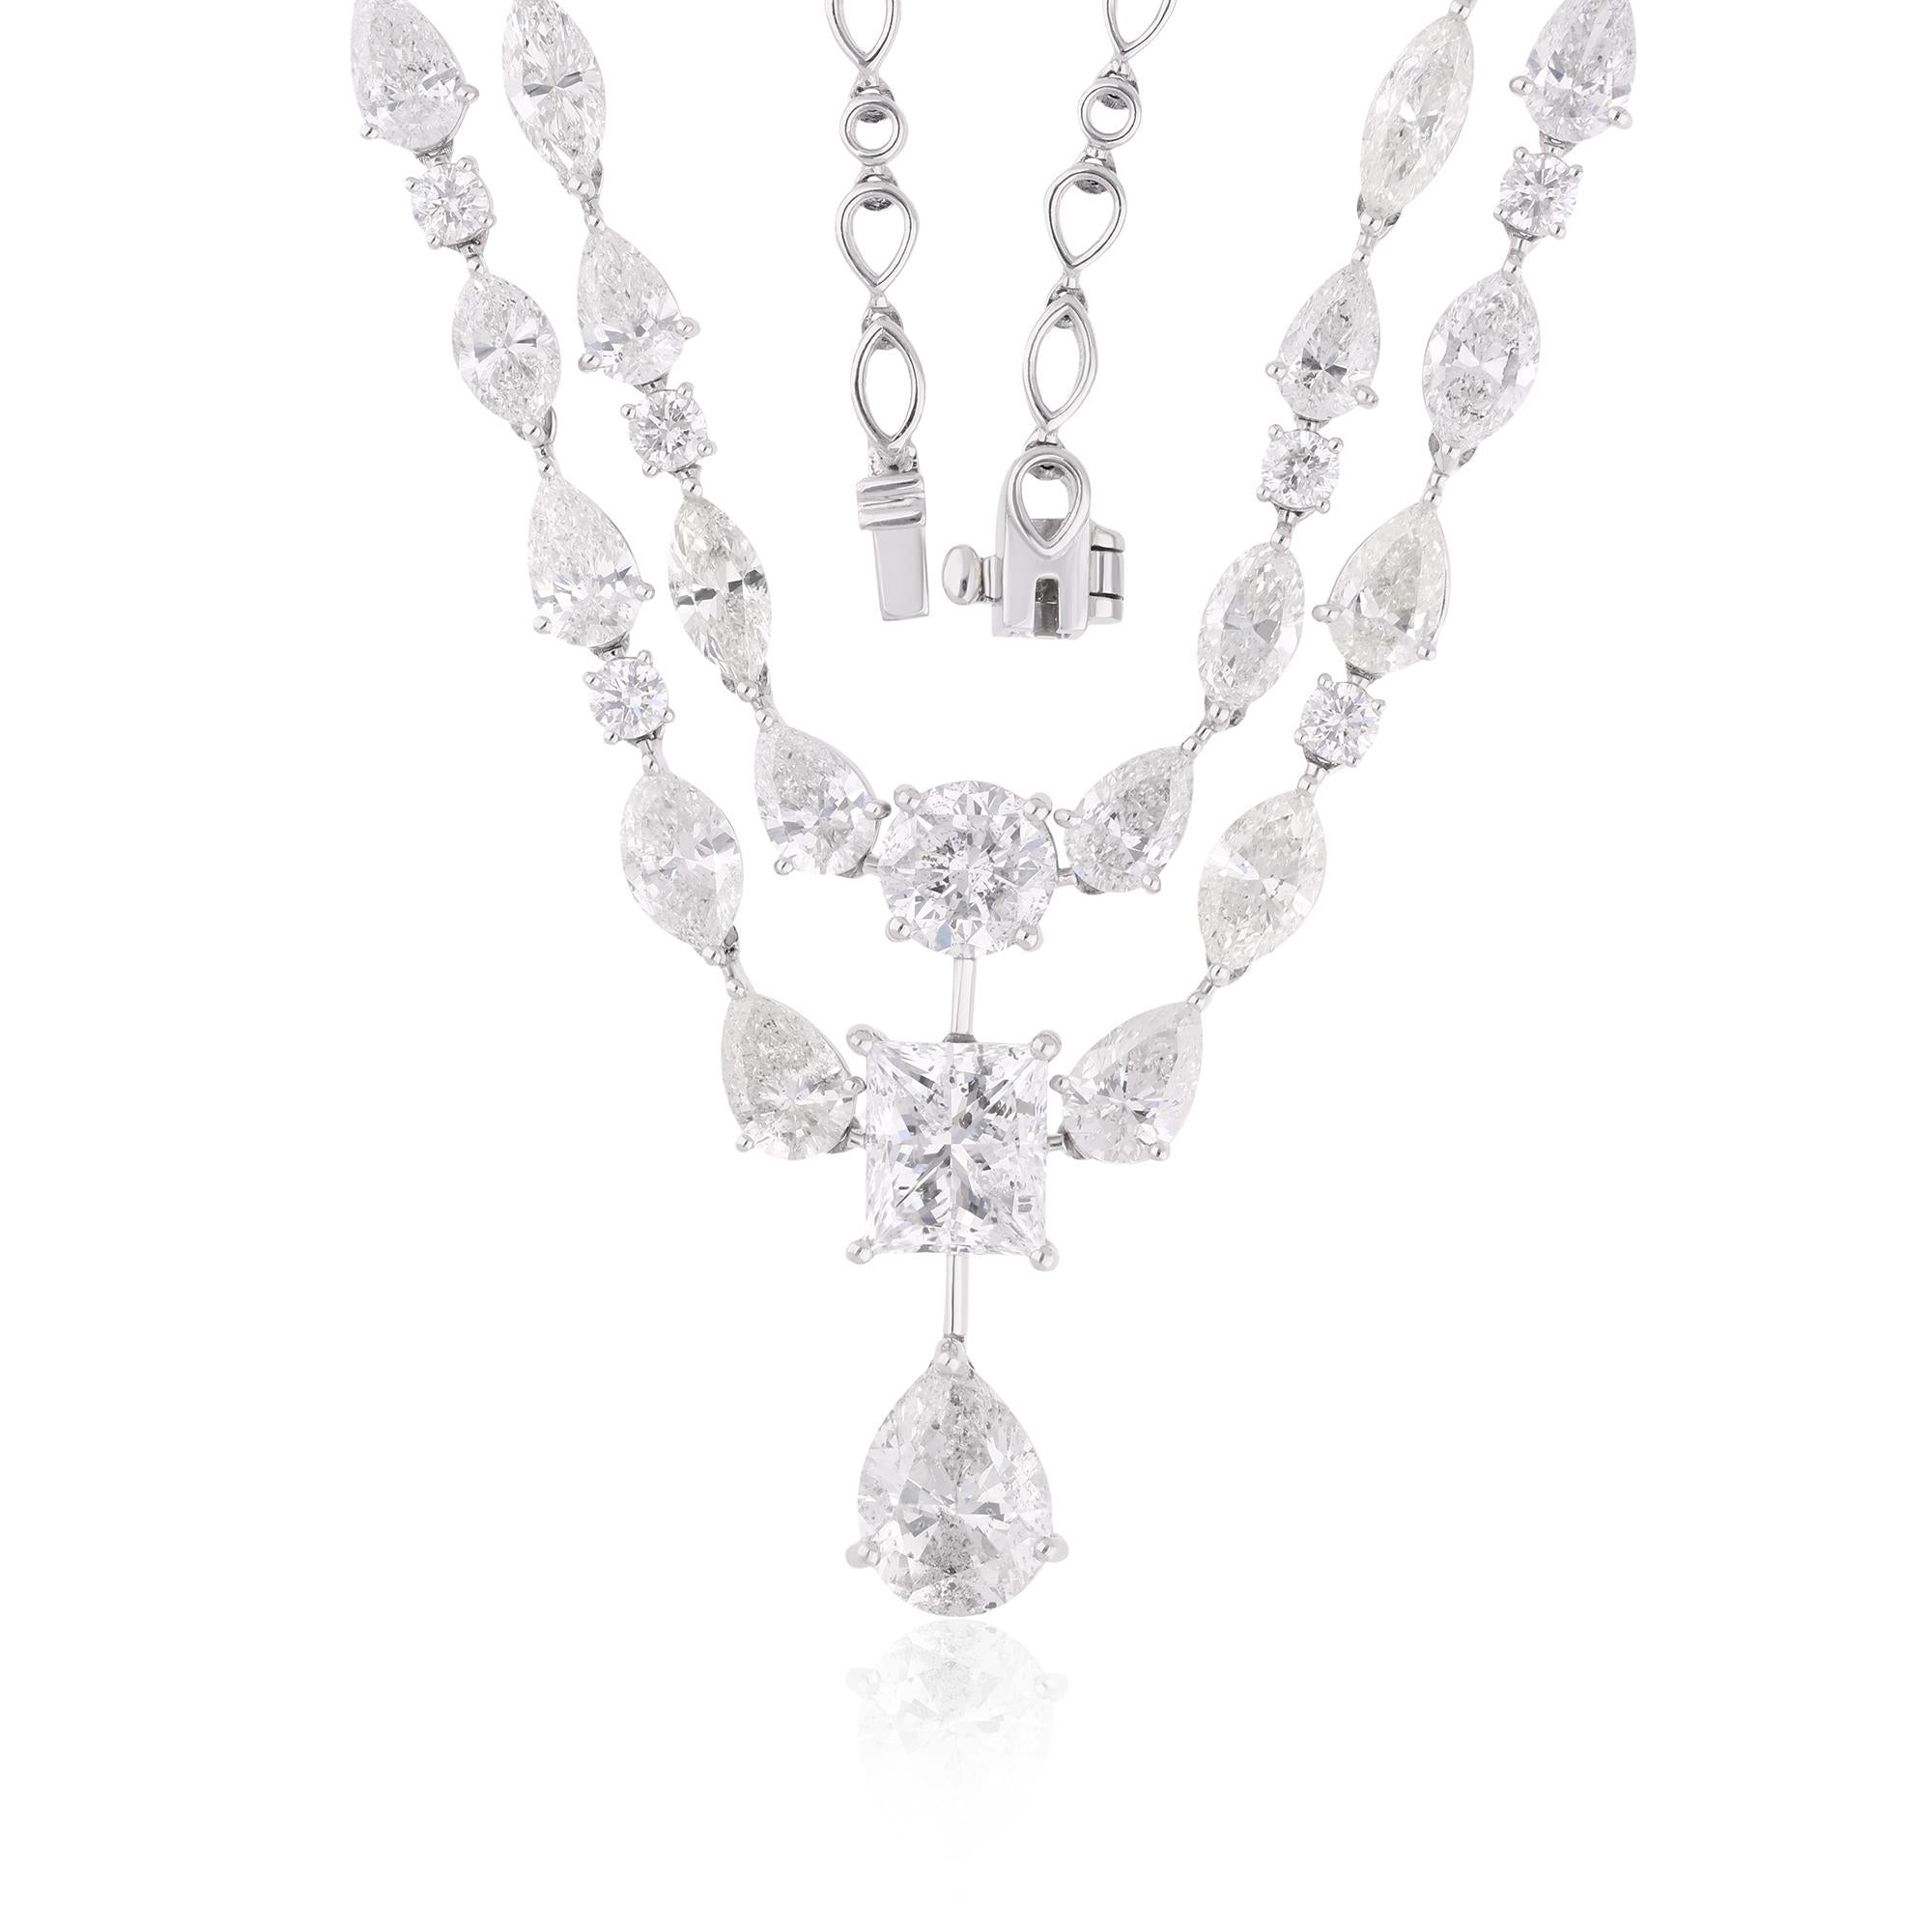 Adorn yourself with the unparalleled opulence of this Natural 24.16 Carat Multi-Shape Diamond Necklace, intricately set in luxurious 18 Karat White Gold. This exquisite piece of fine jewelry is a true masterpiece, exuding sophistication and timeless